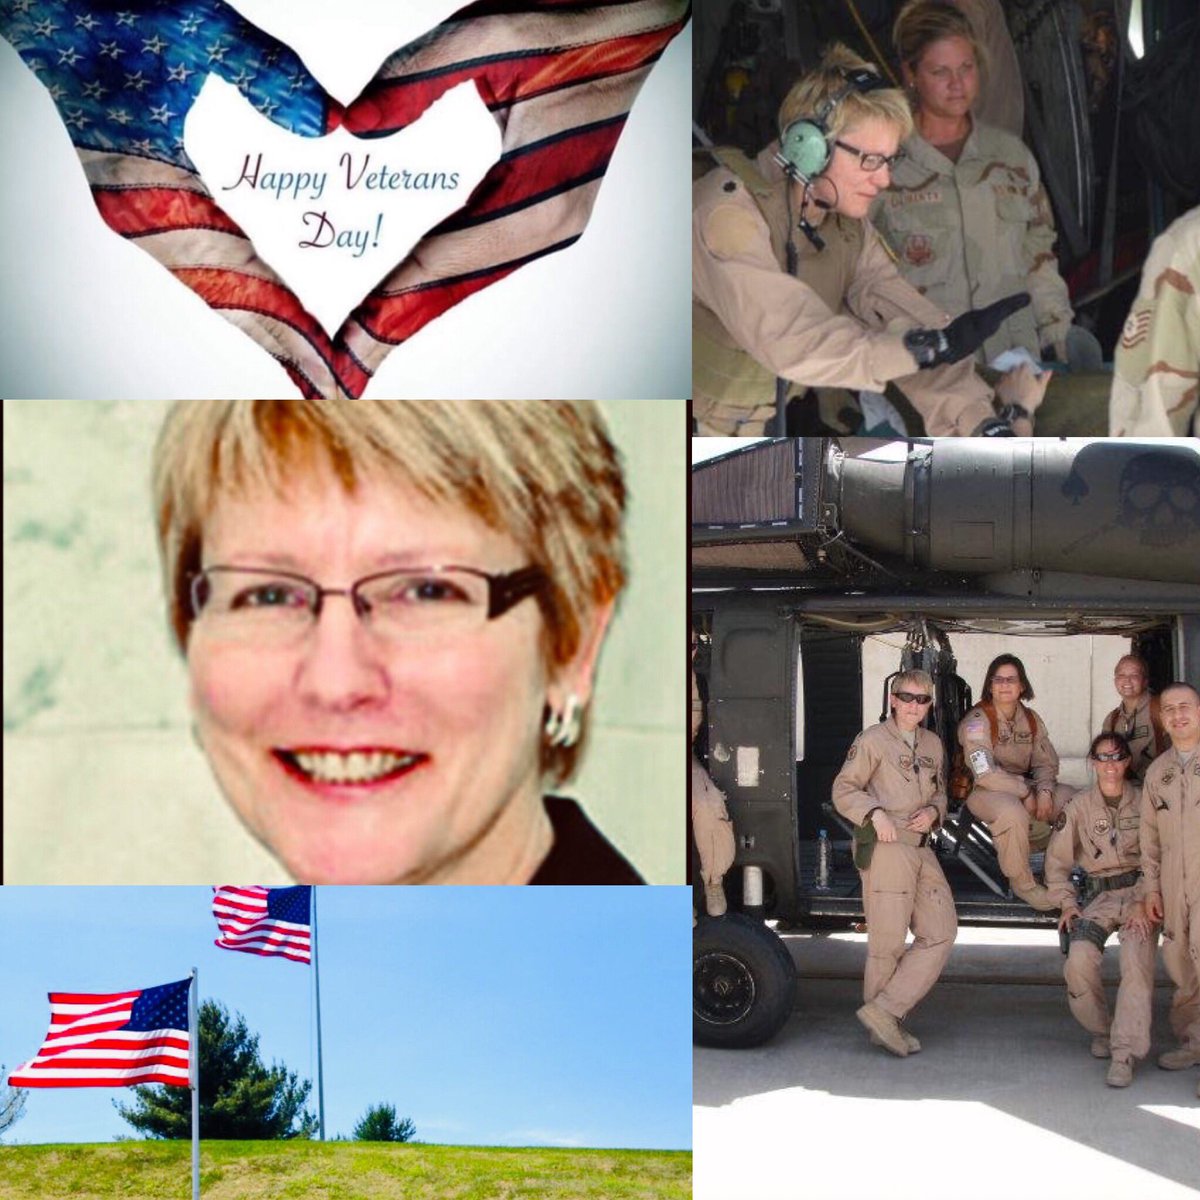 Shout out & A HUGE “THANK YOU FOR YOUR SERVICE” to @C130DNP Dr. Sandra “Sam” Cotton! Not all heros wear capes, some wear dog tags and stethoscopes! WVNurses let us know you served! ❤️
#WVNA #VeteranNurse #VeteransDay #ThankAVeteran🇺🇸